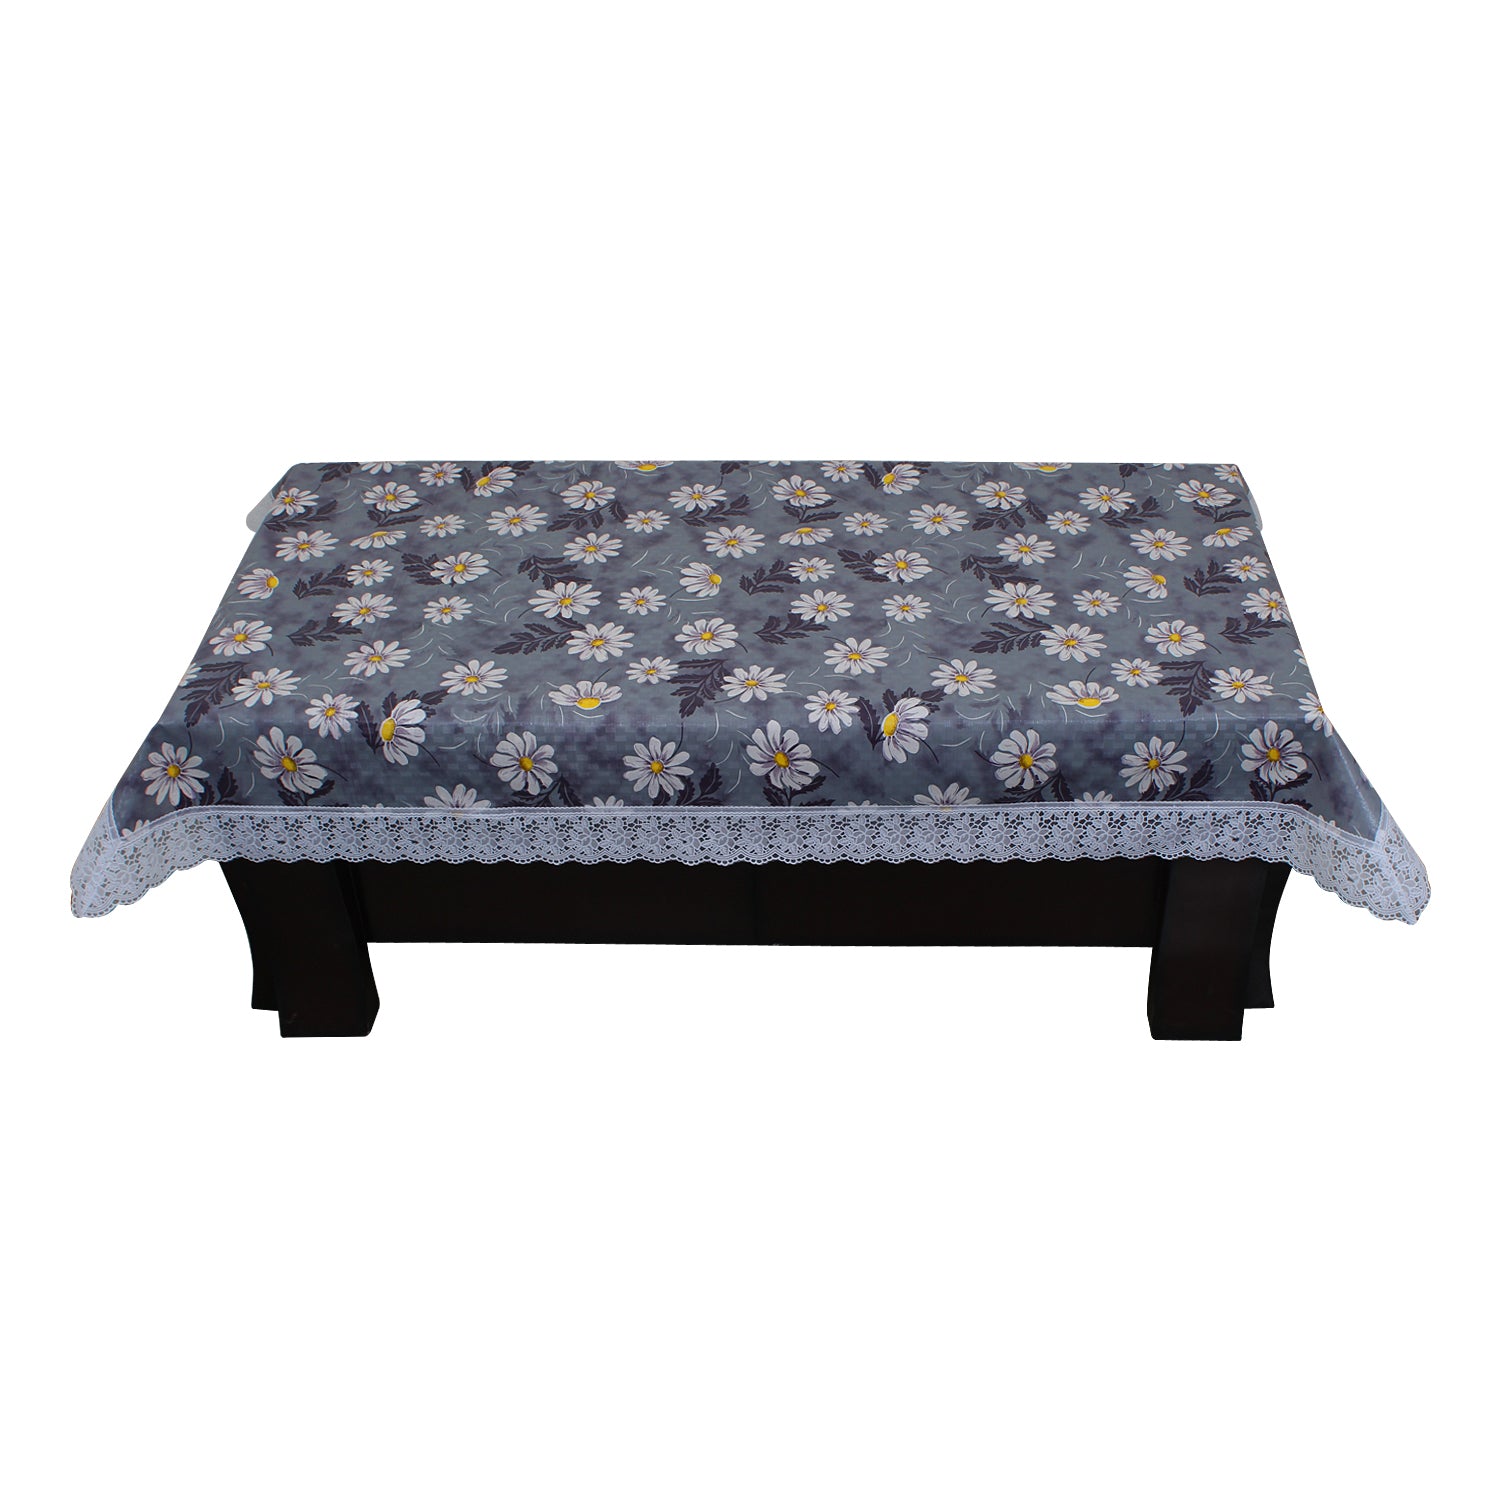 Waterproof and Dustproof Center Table Cover, SA10 - (40X60 Inch) - Dream Care Furnishings Private Limited